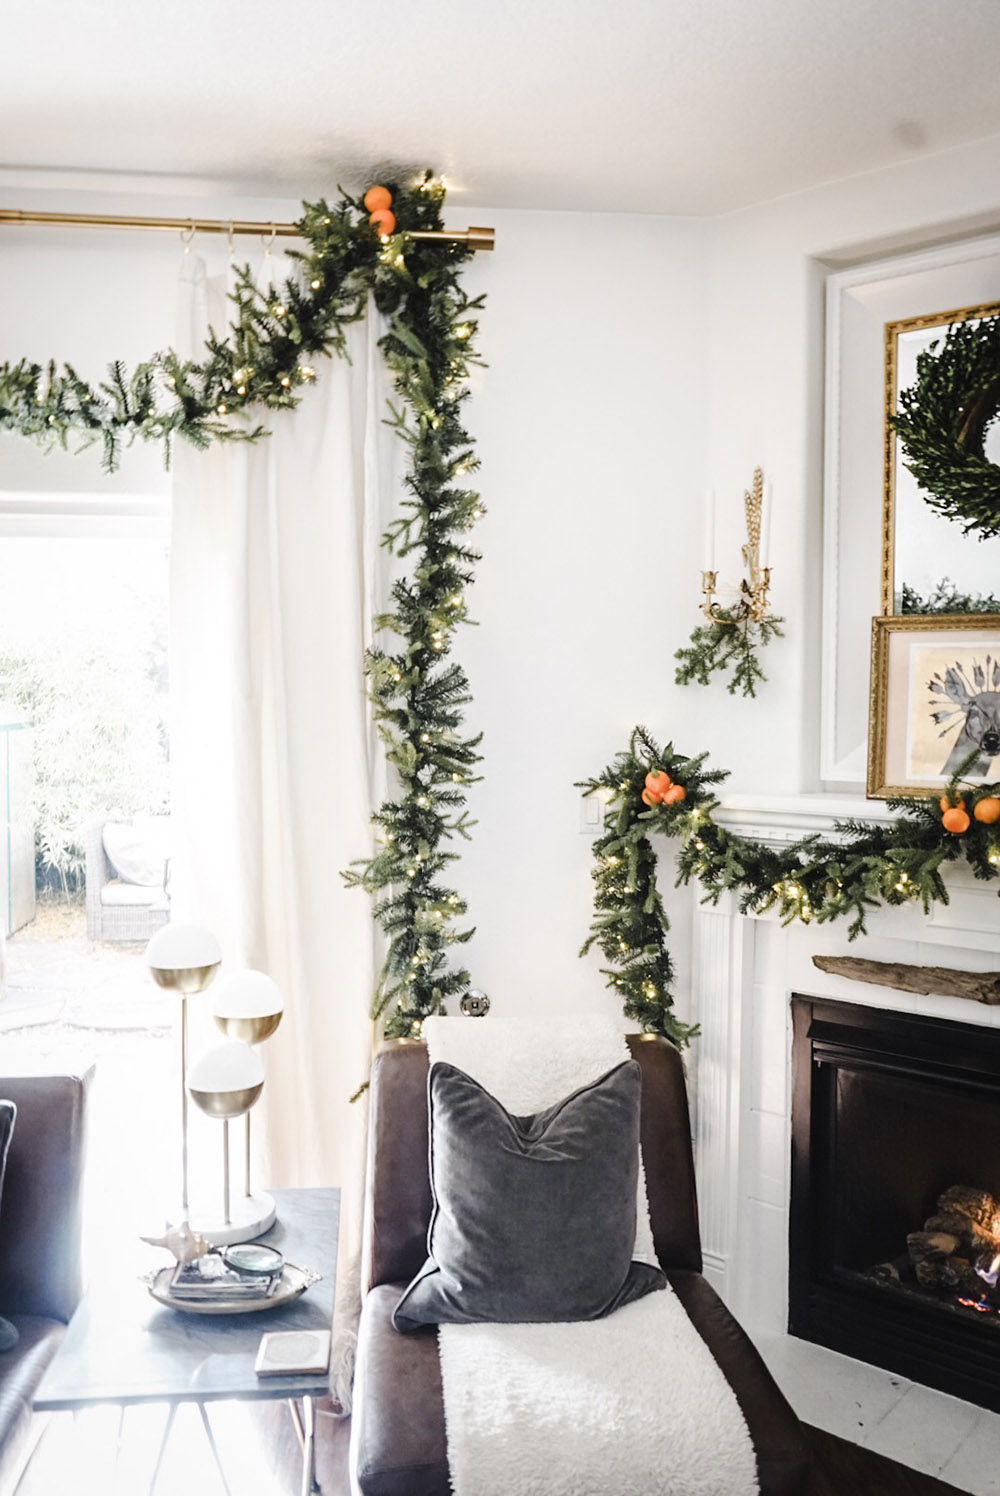 A window and fireplace decorated with garland and oranges.